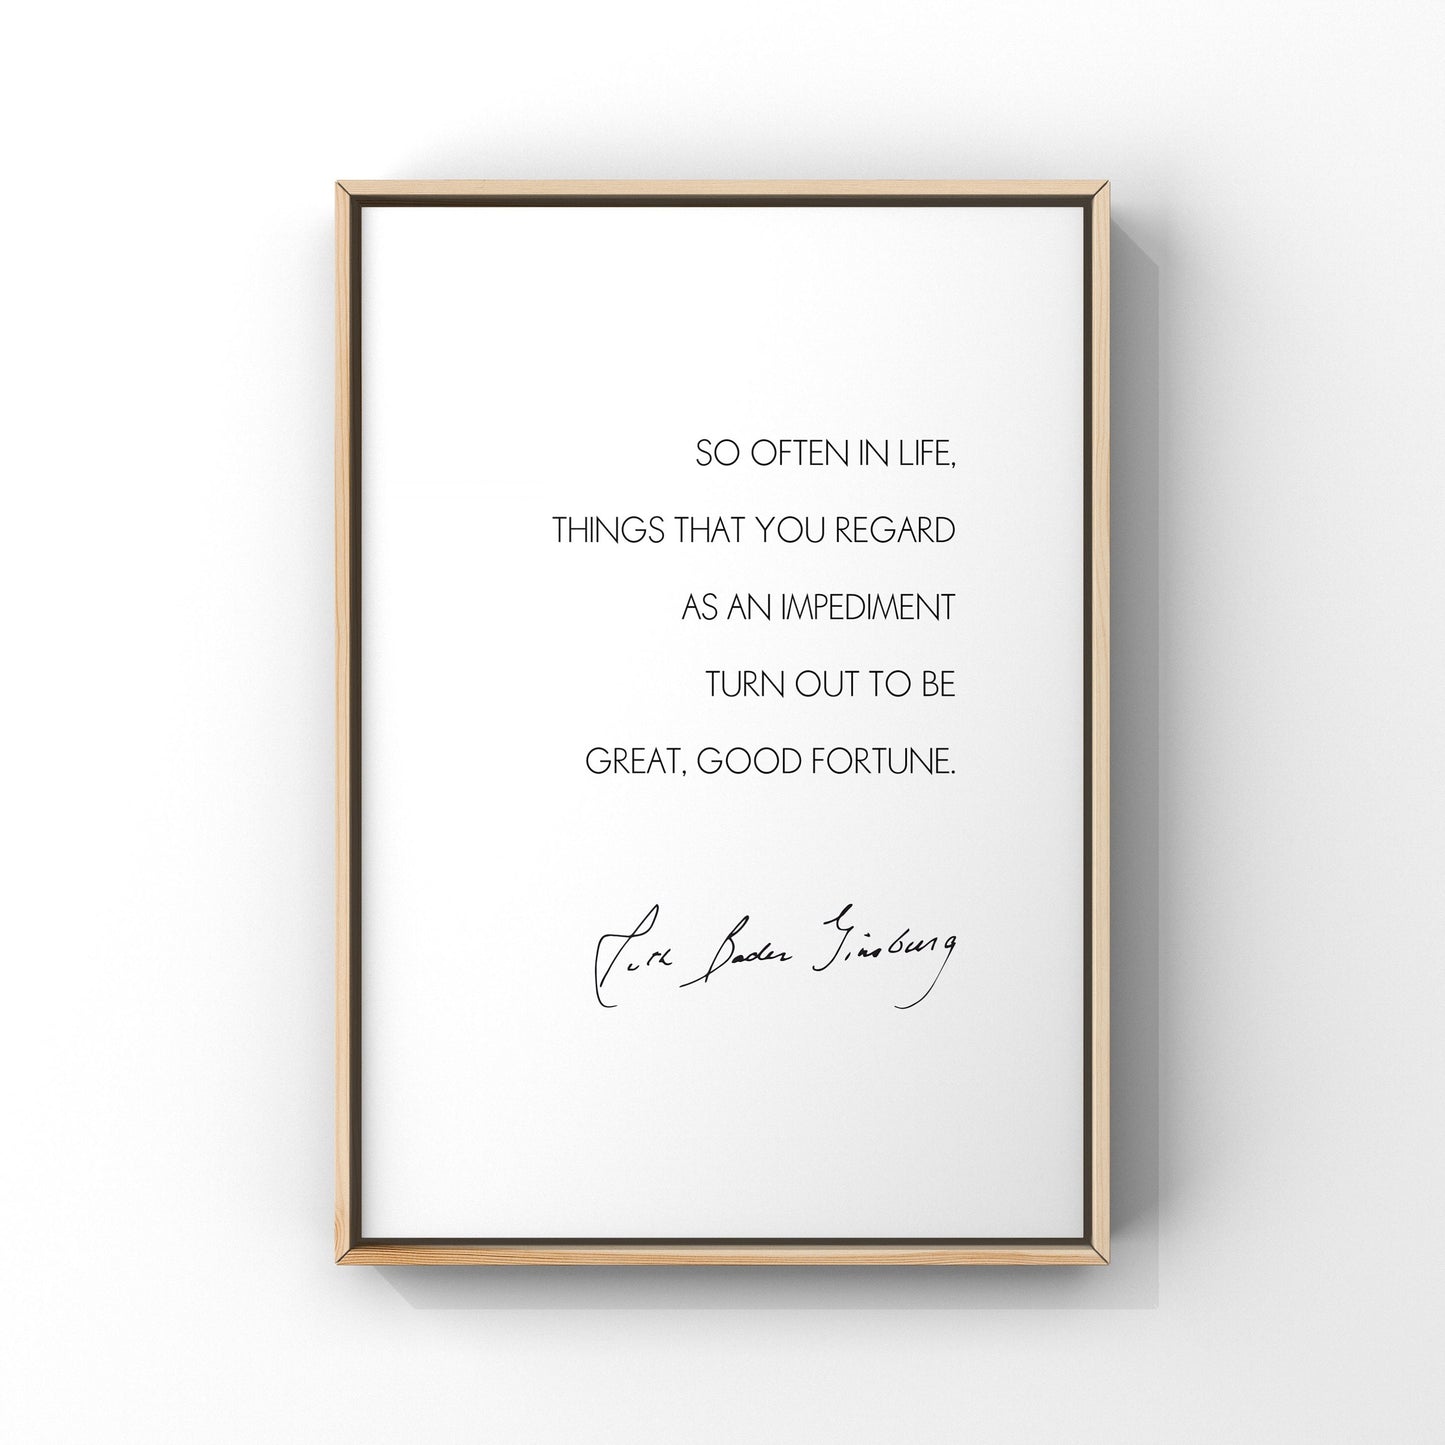 So often in life things that you regard,Bring great good fortune,Ruth Bader Ginsburg print,RBG quote,Inspirational print,Wall decor,RBG gift